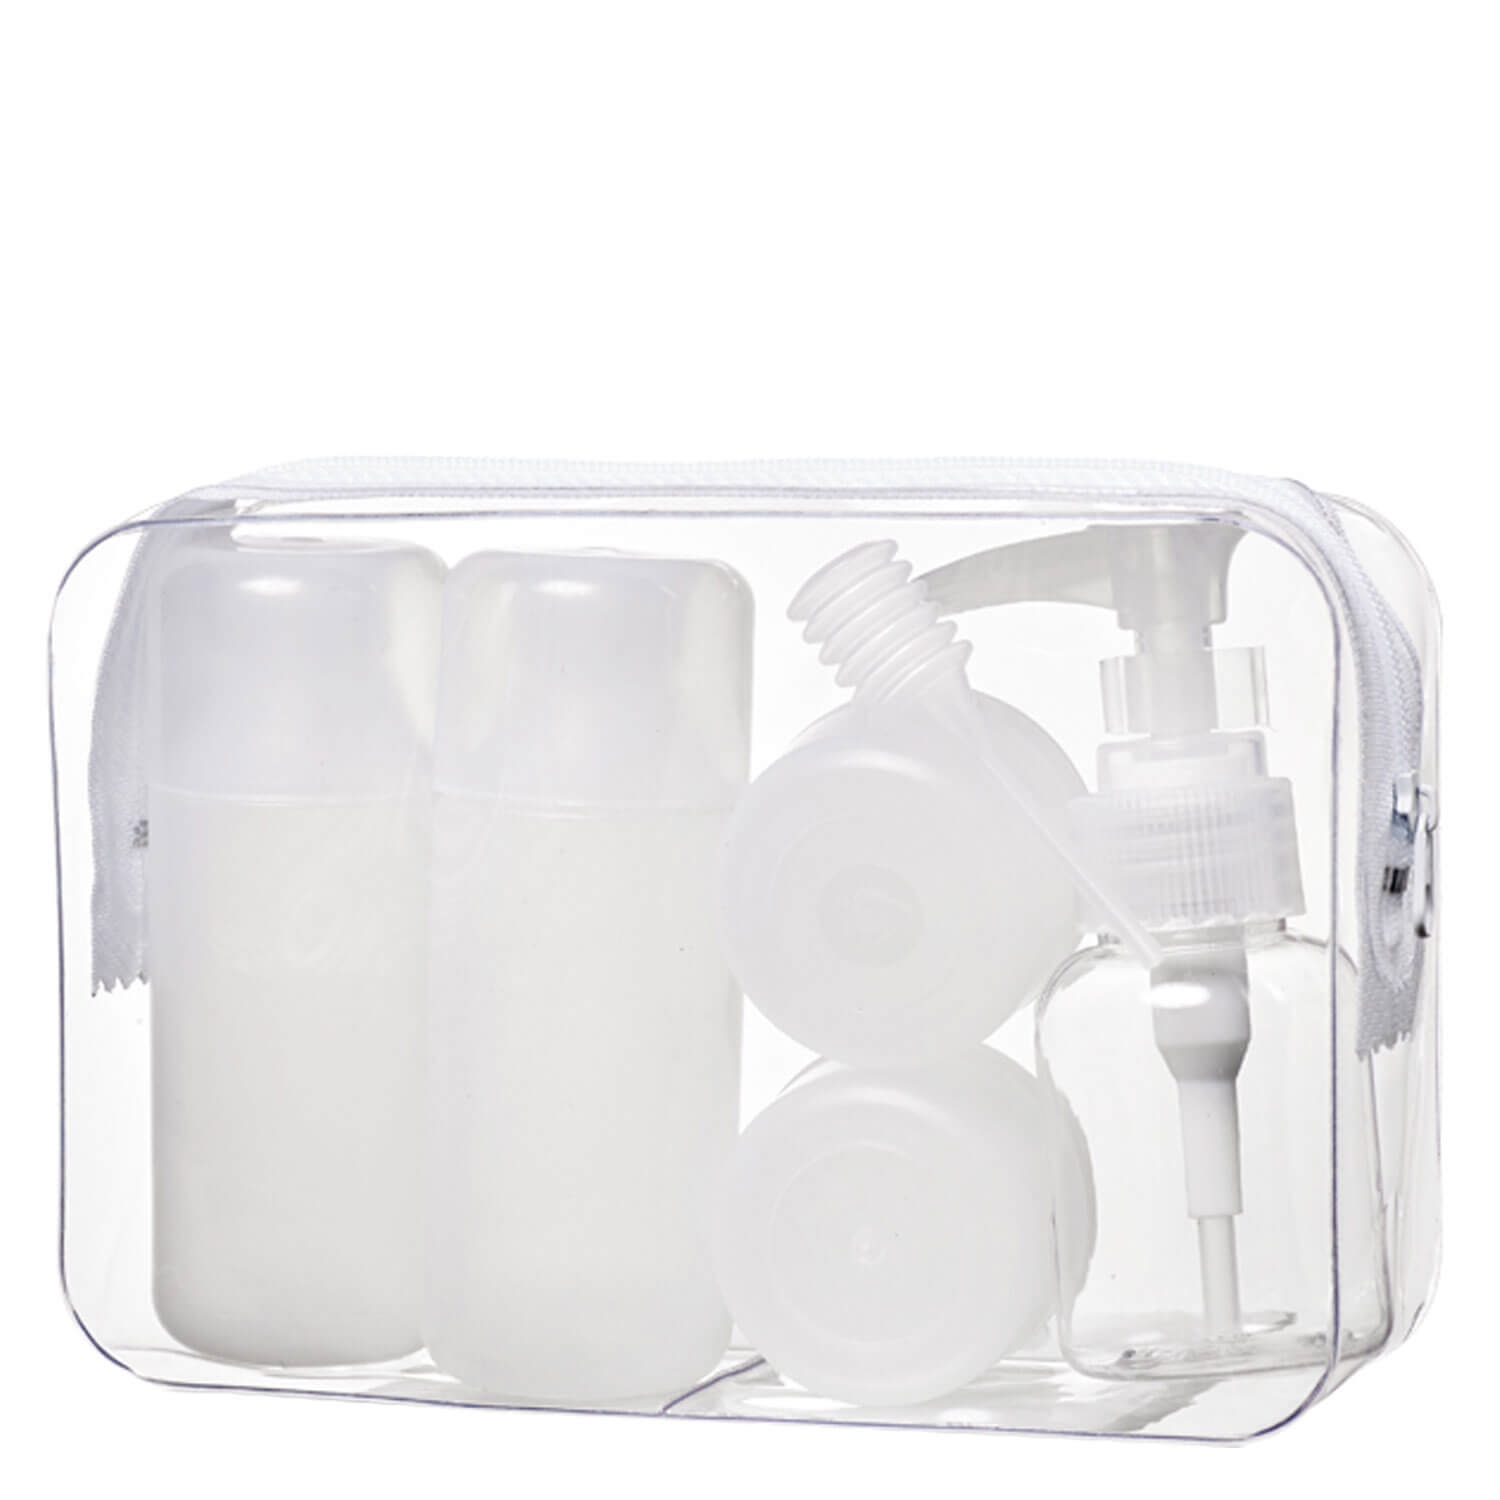 Product image from TRISA Travel - Reiseset Transparent Gross